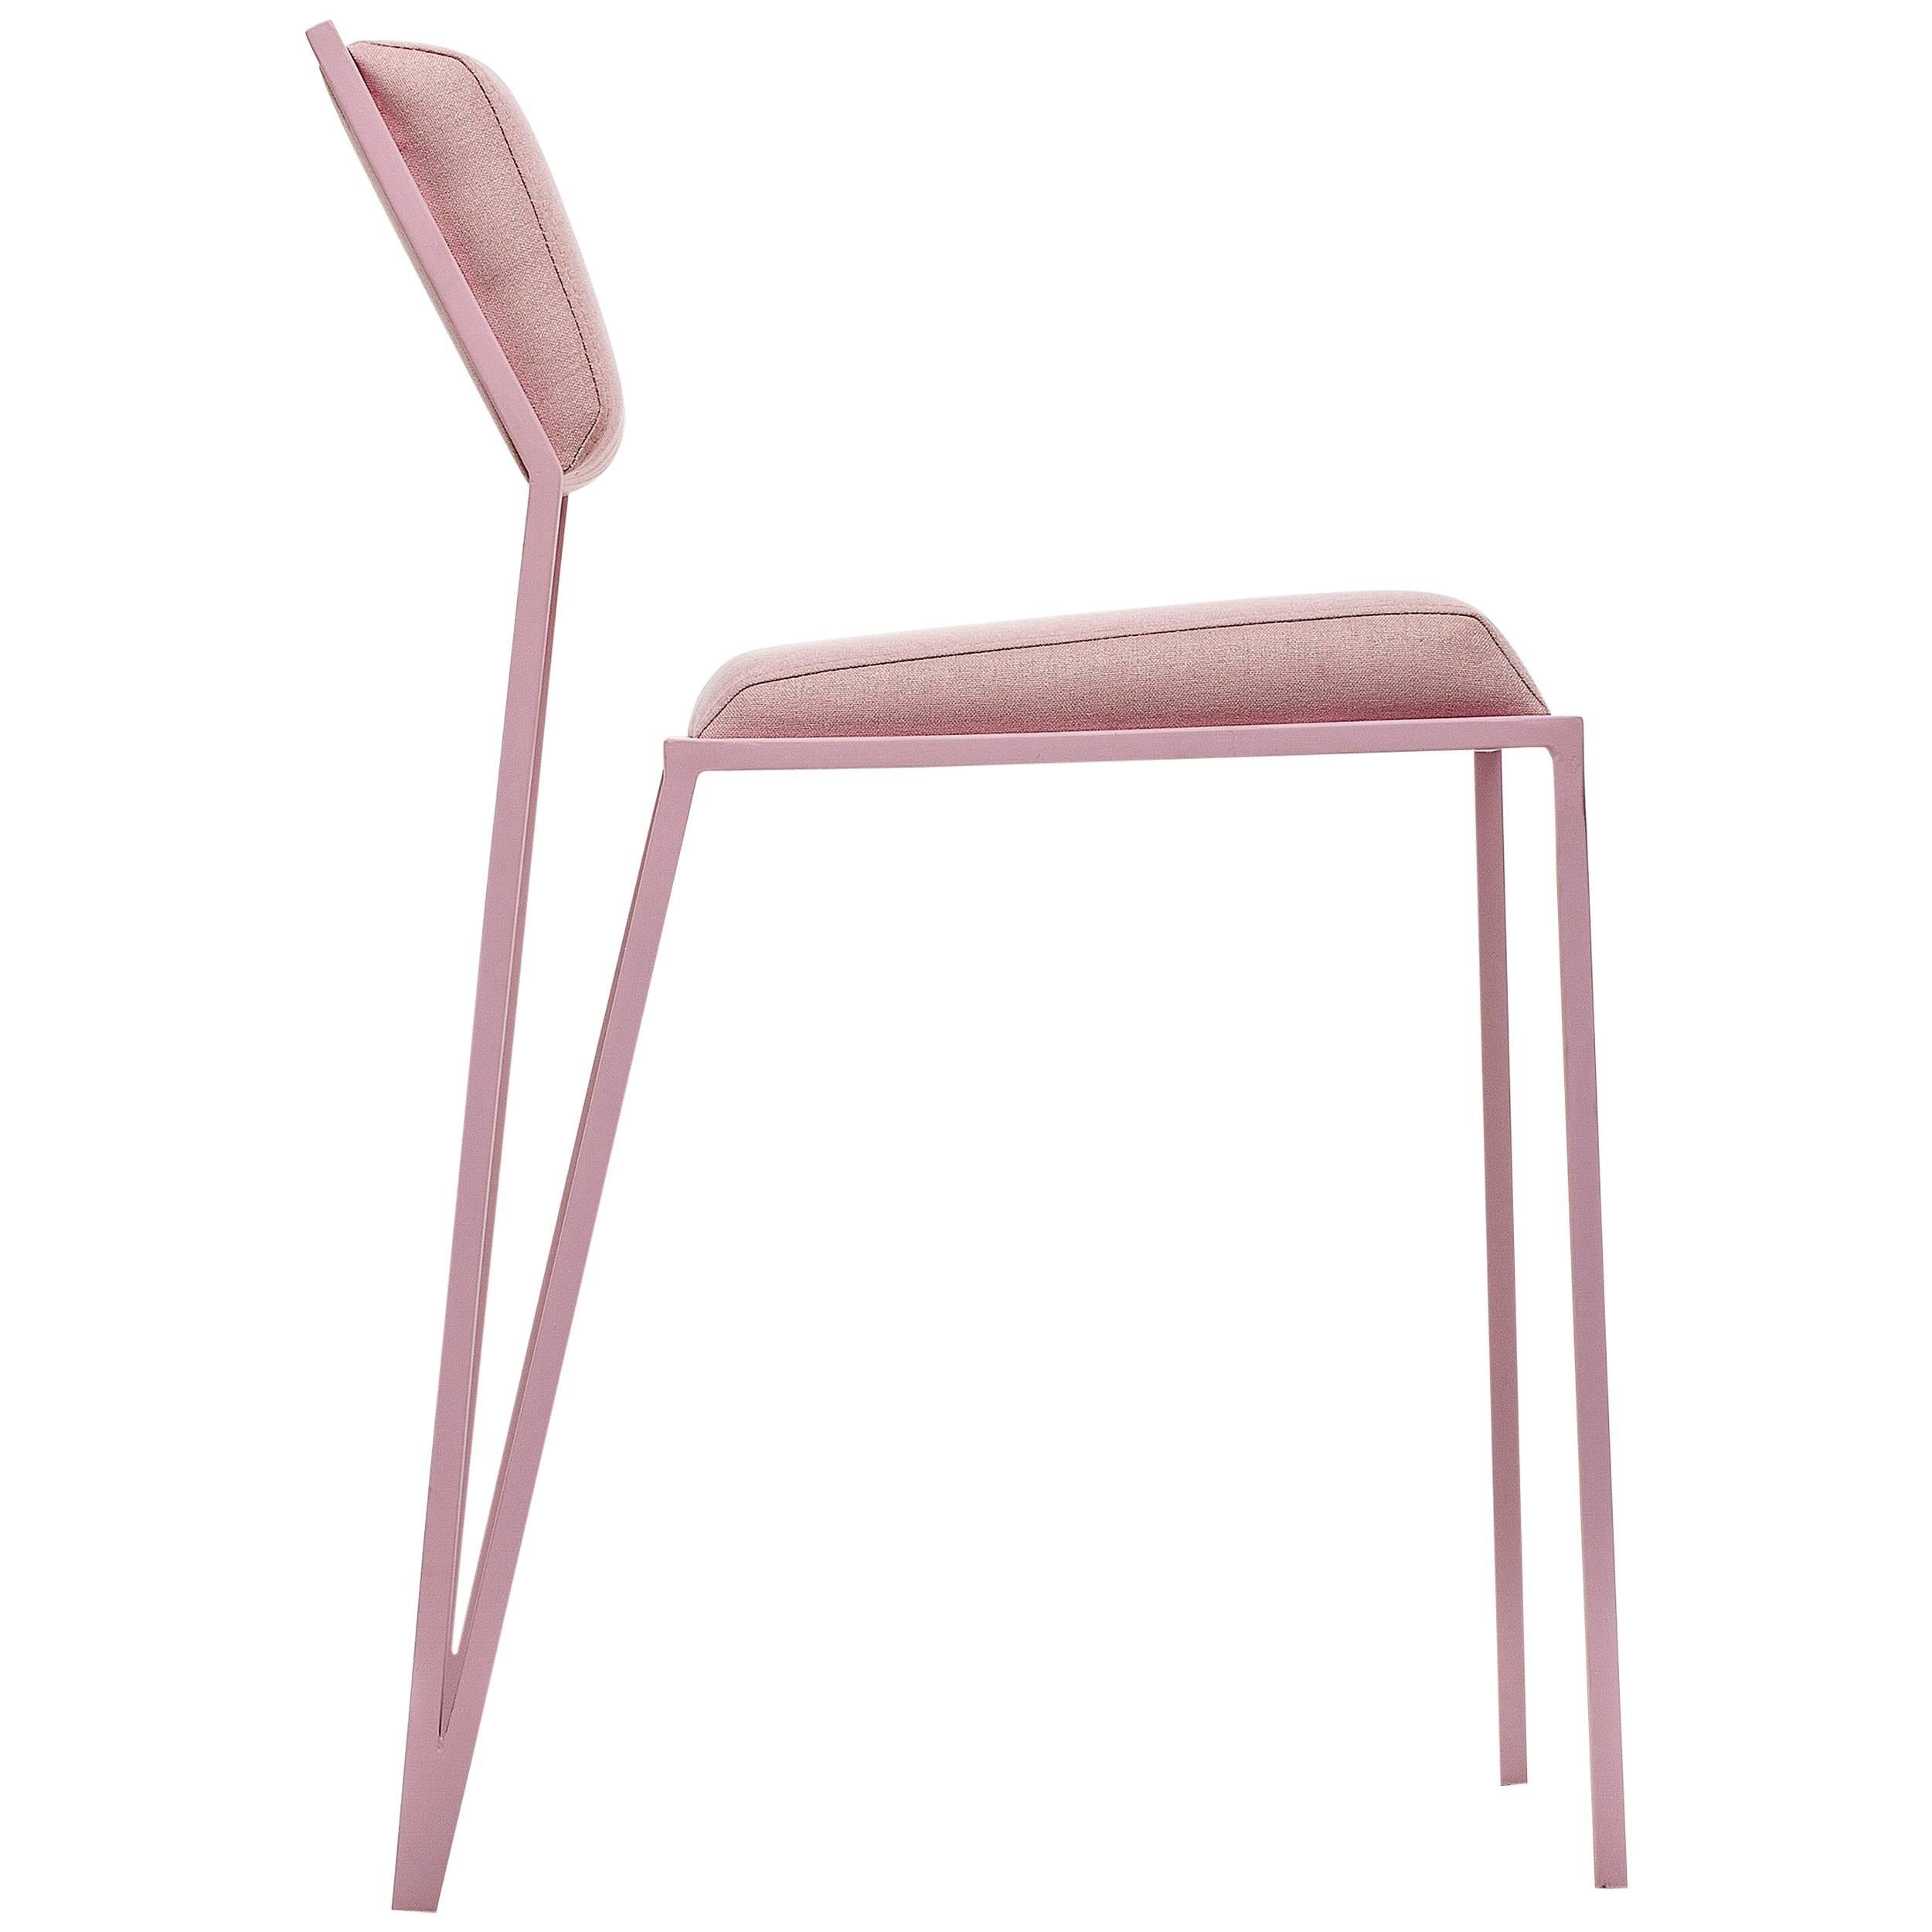 The minimalist 'Velvet' chair was designed from clean and pure lines with the elimination of any kind of excesses so that your greater identity were the colors, in a range of 09 options chosen by the user. By its minimalist appearance, the color of